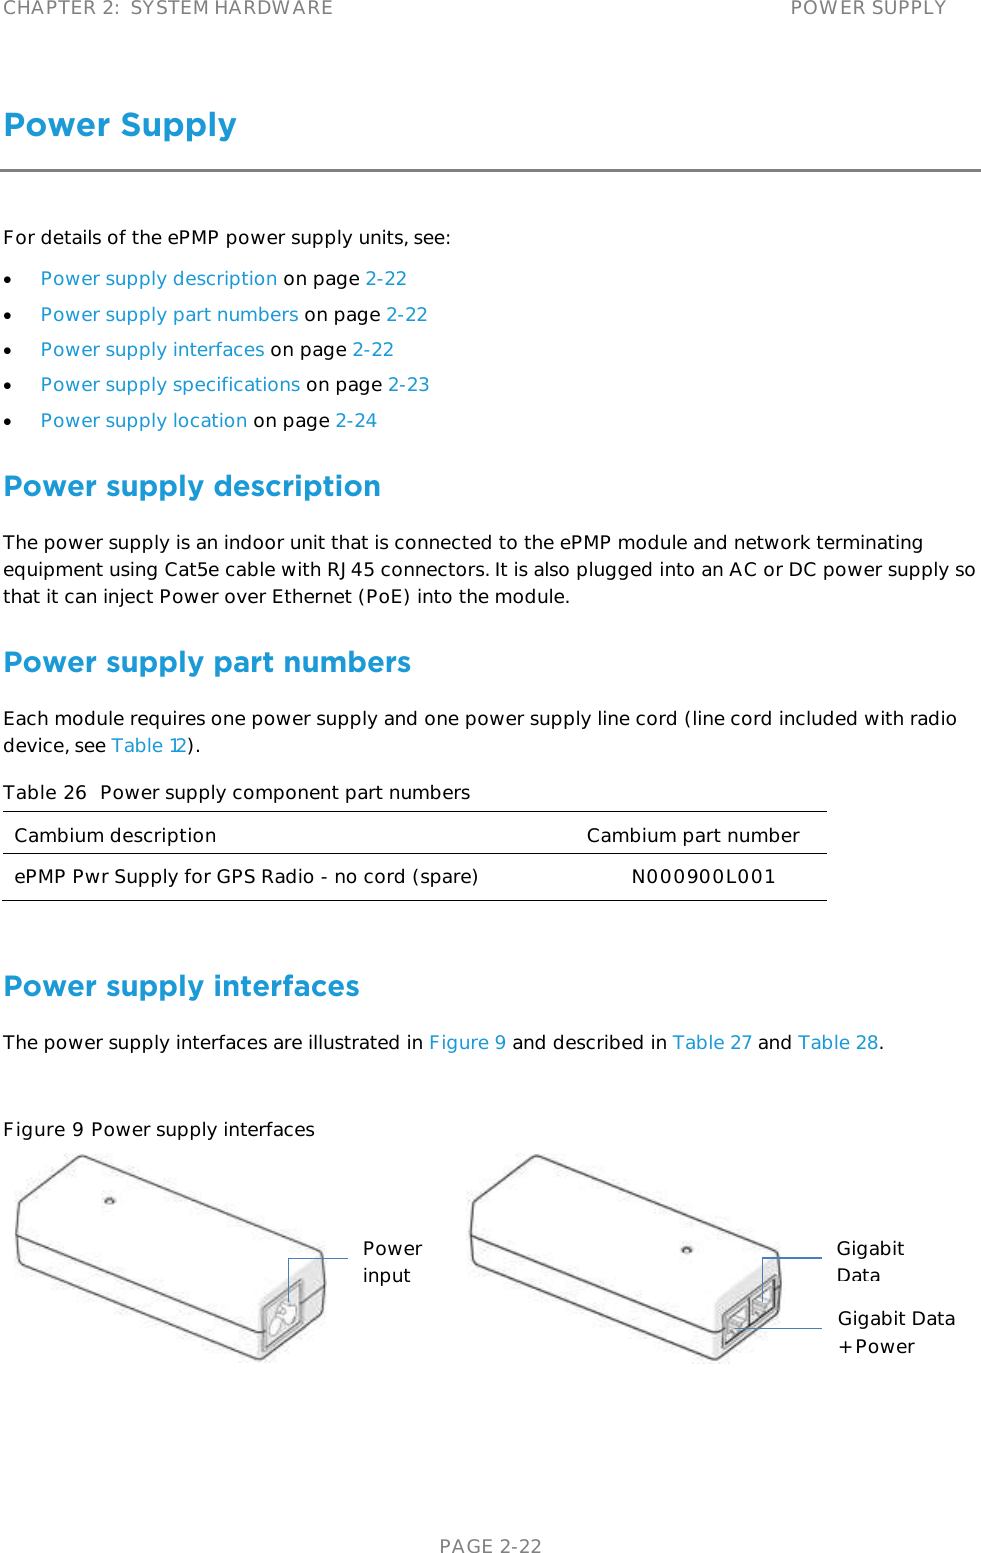 CHAPTER 2:  SYSTEM HARDWARE POWER SUPPLY   PAGE 2-22 Power Supply For details of the ePMP power supply units, see:  Power supply description on page 2-22  Power supply part numbers on page 2-22  Power supply interfaces on page 2-22  Power supply specifications on page 2-23  Power supply location on page 2-24 Power supply description The power supply is an indoor unit that is connected to the ePMP module and network terminating equipment using Cat5e cable with RJ45 connectors. It is also plugged into an AC or DC power supply so that it can inject Power over Ethernet (PoE) into the module.  Power supply part numbers Each module requires one power supply and one power supply line cord (line cord included with radio device, see Table 12).  Table 26  Power supply component part numbers Cambium description Cambium part number ePMP Pwr Supply for GPS Radio - no cord (spare) N000900L001  Power supply interfaces The power supply interfaces are illustrated in Figure 9 and described in Table 27 and Table 28.  Figure 9 Power supply interfaces    Gigabit Data Gigabit Data + Power Power input 